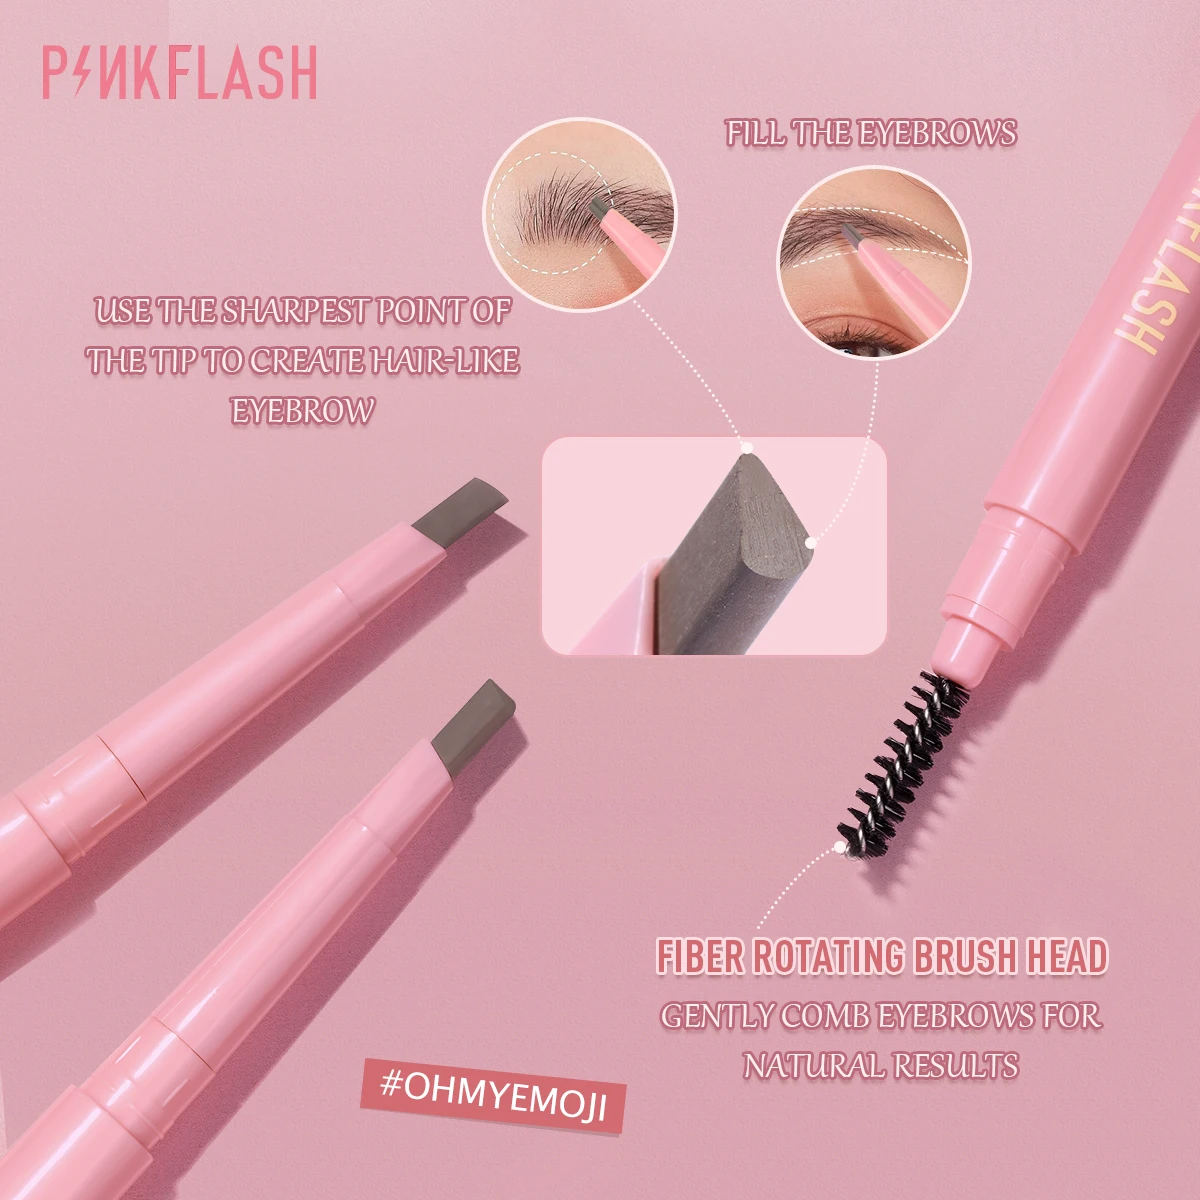 PINKFLASH Automatic Eyebrow Pencil Waterproof Long-lasting High Pigmented Easy to Blend Soft Cruelty-free Eye Brow Pen Makeup